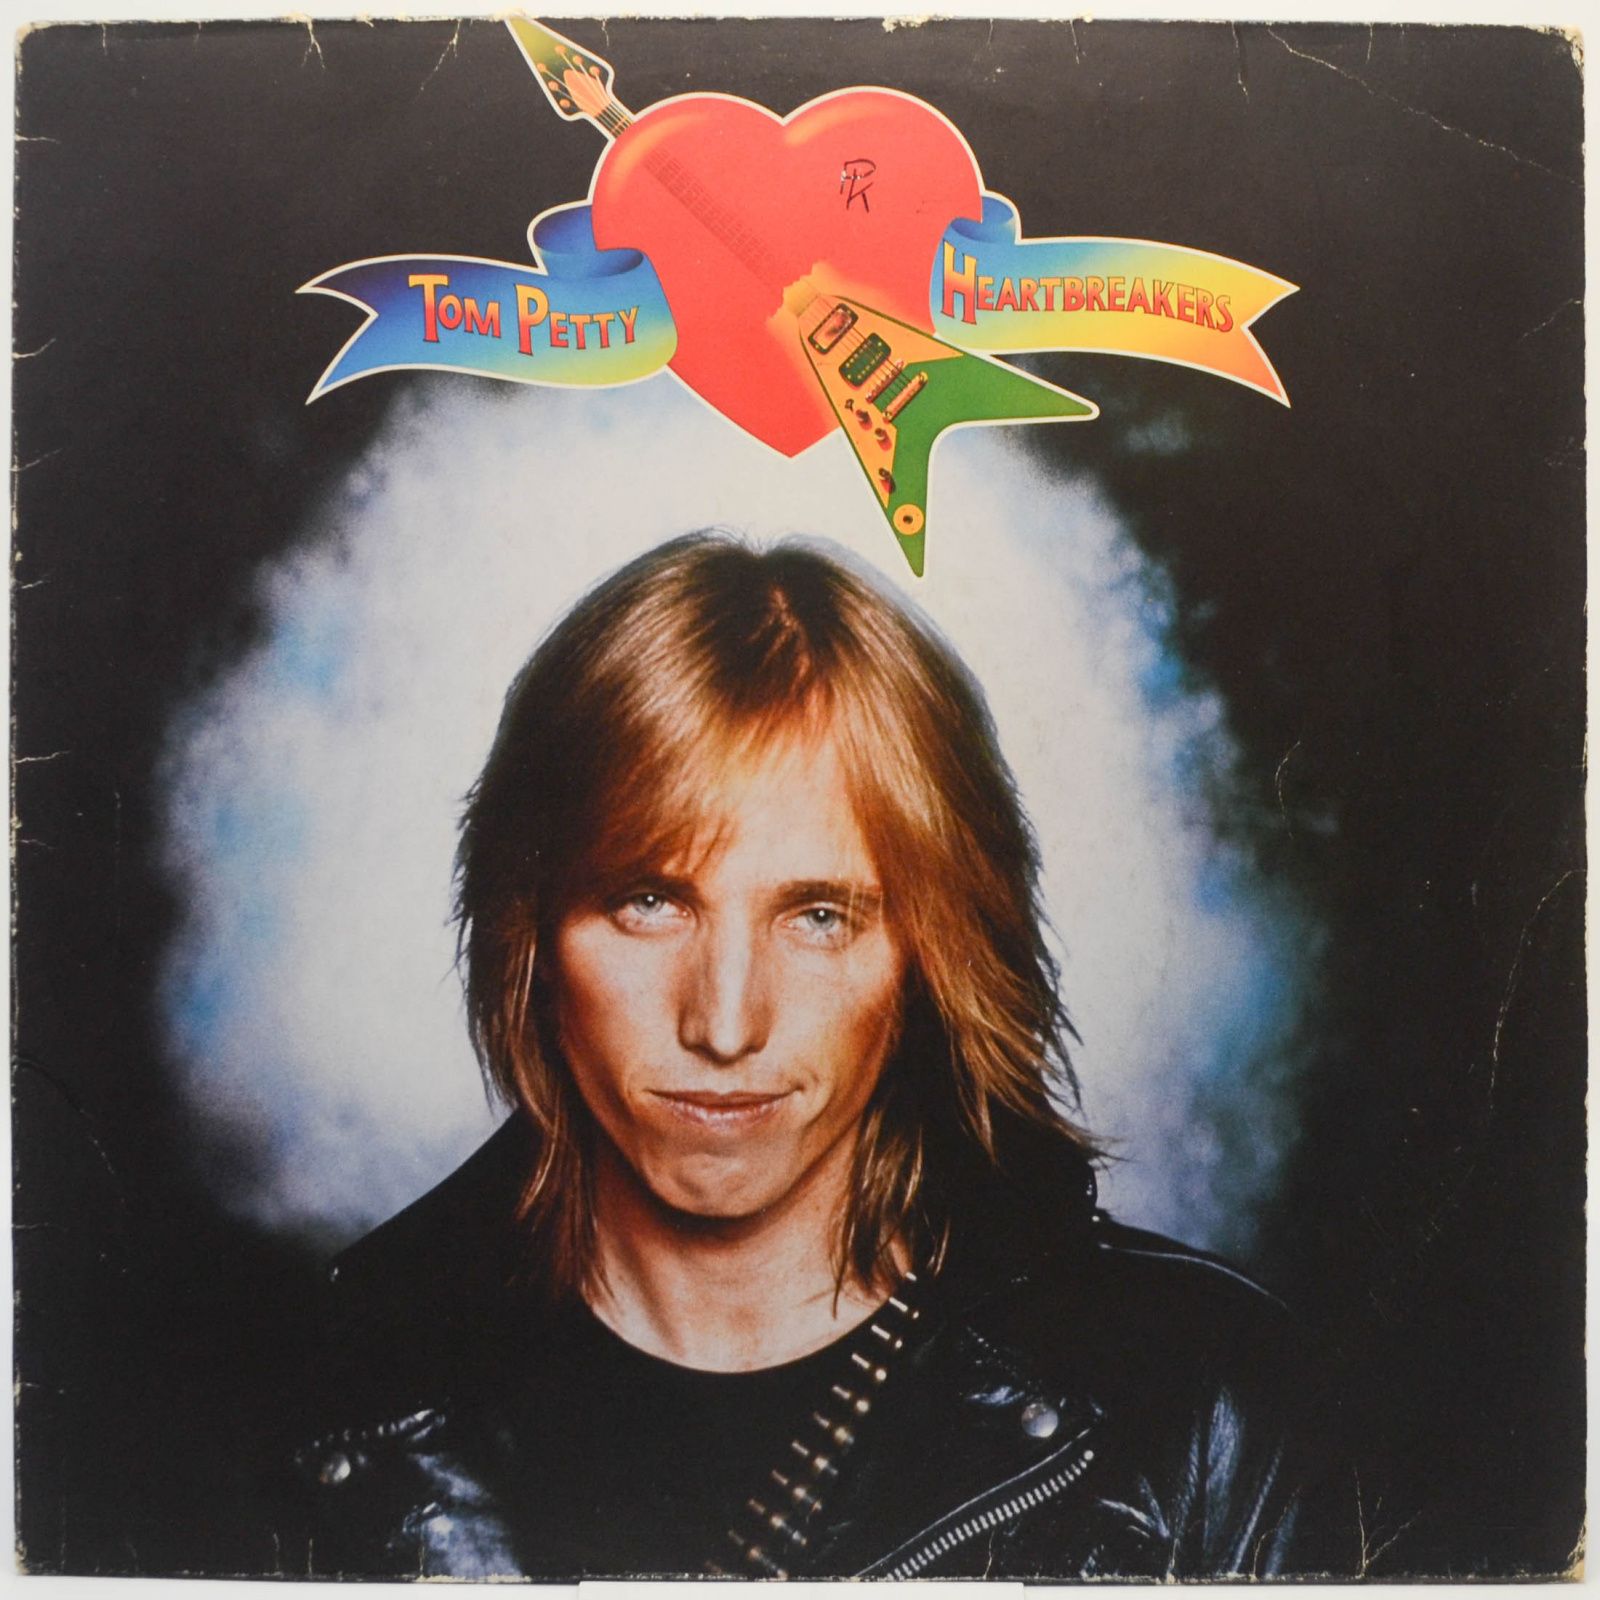 Tom Petty And The Heartbreakers — Tom Petty And The Heartbreakers, 1977